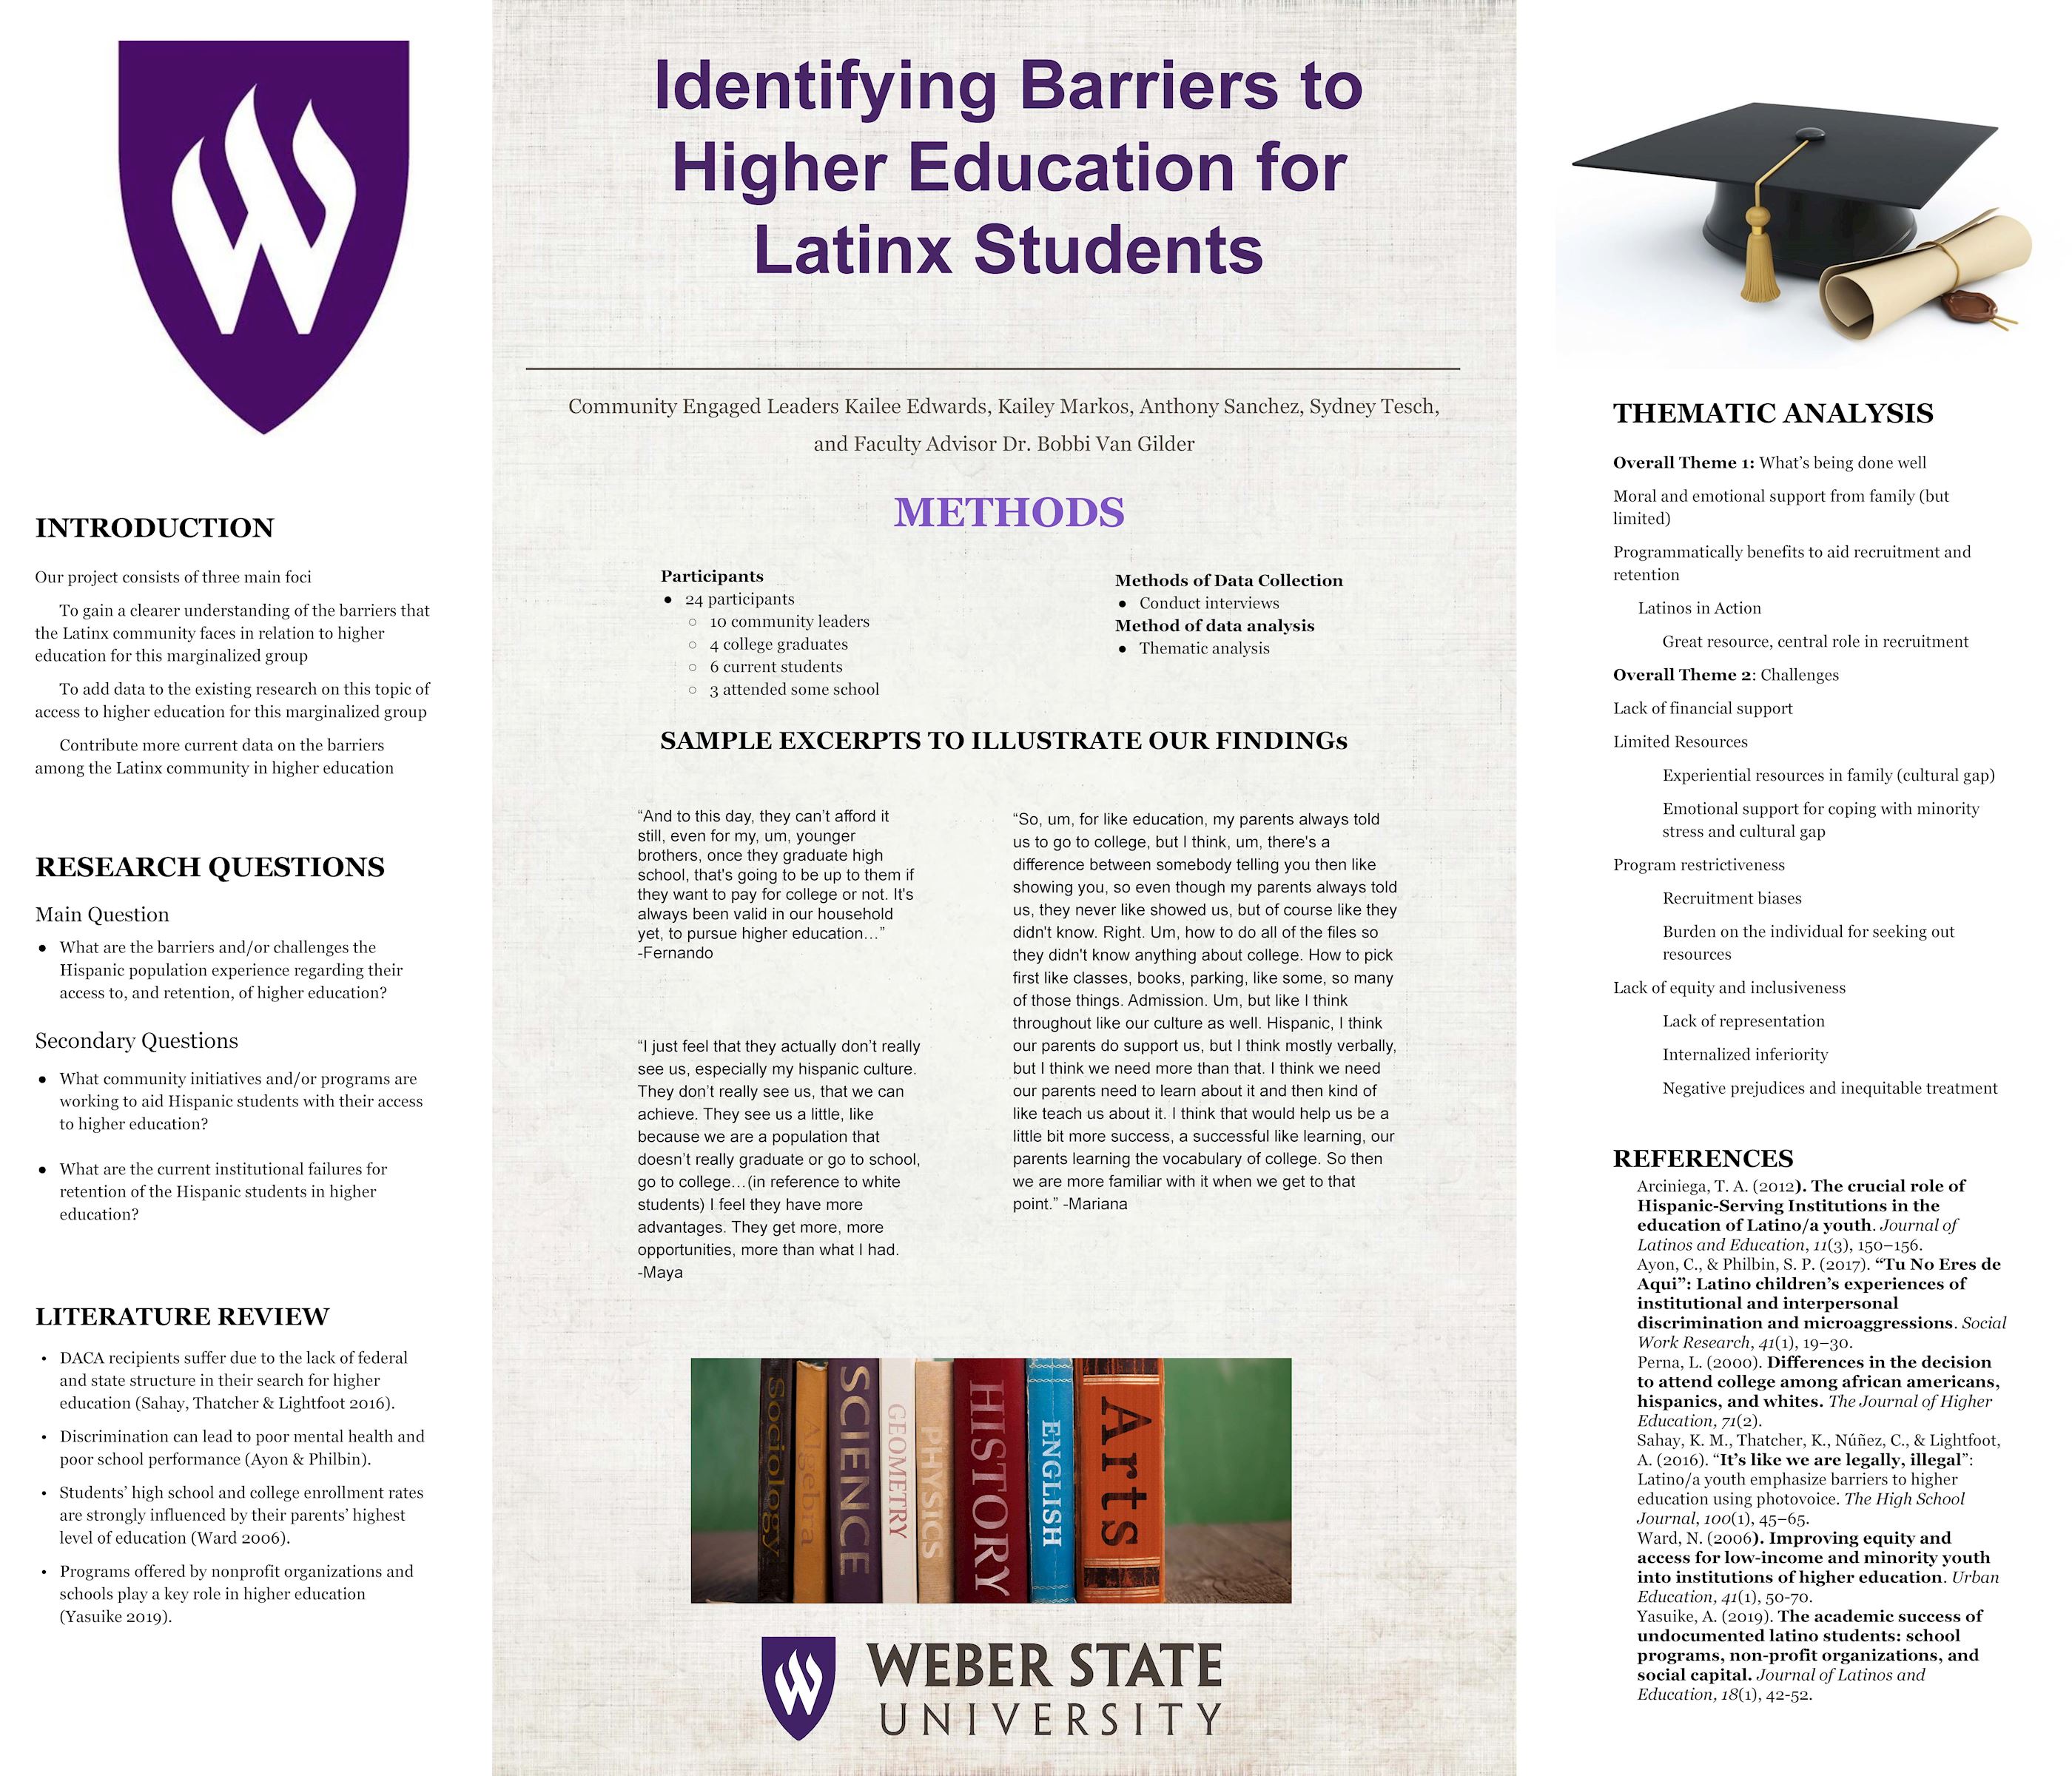 Identifying Barriers to Higher Education for Latinx Students Poster